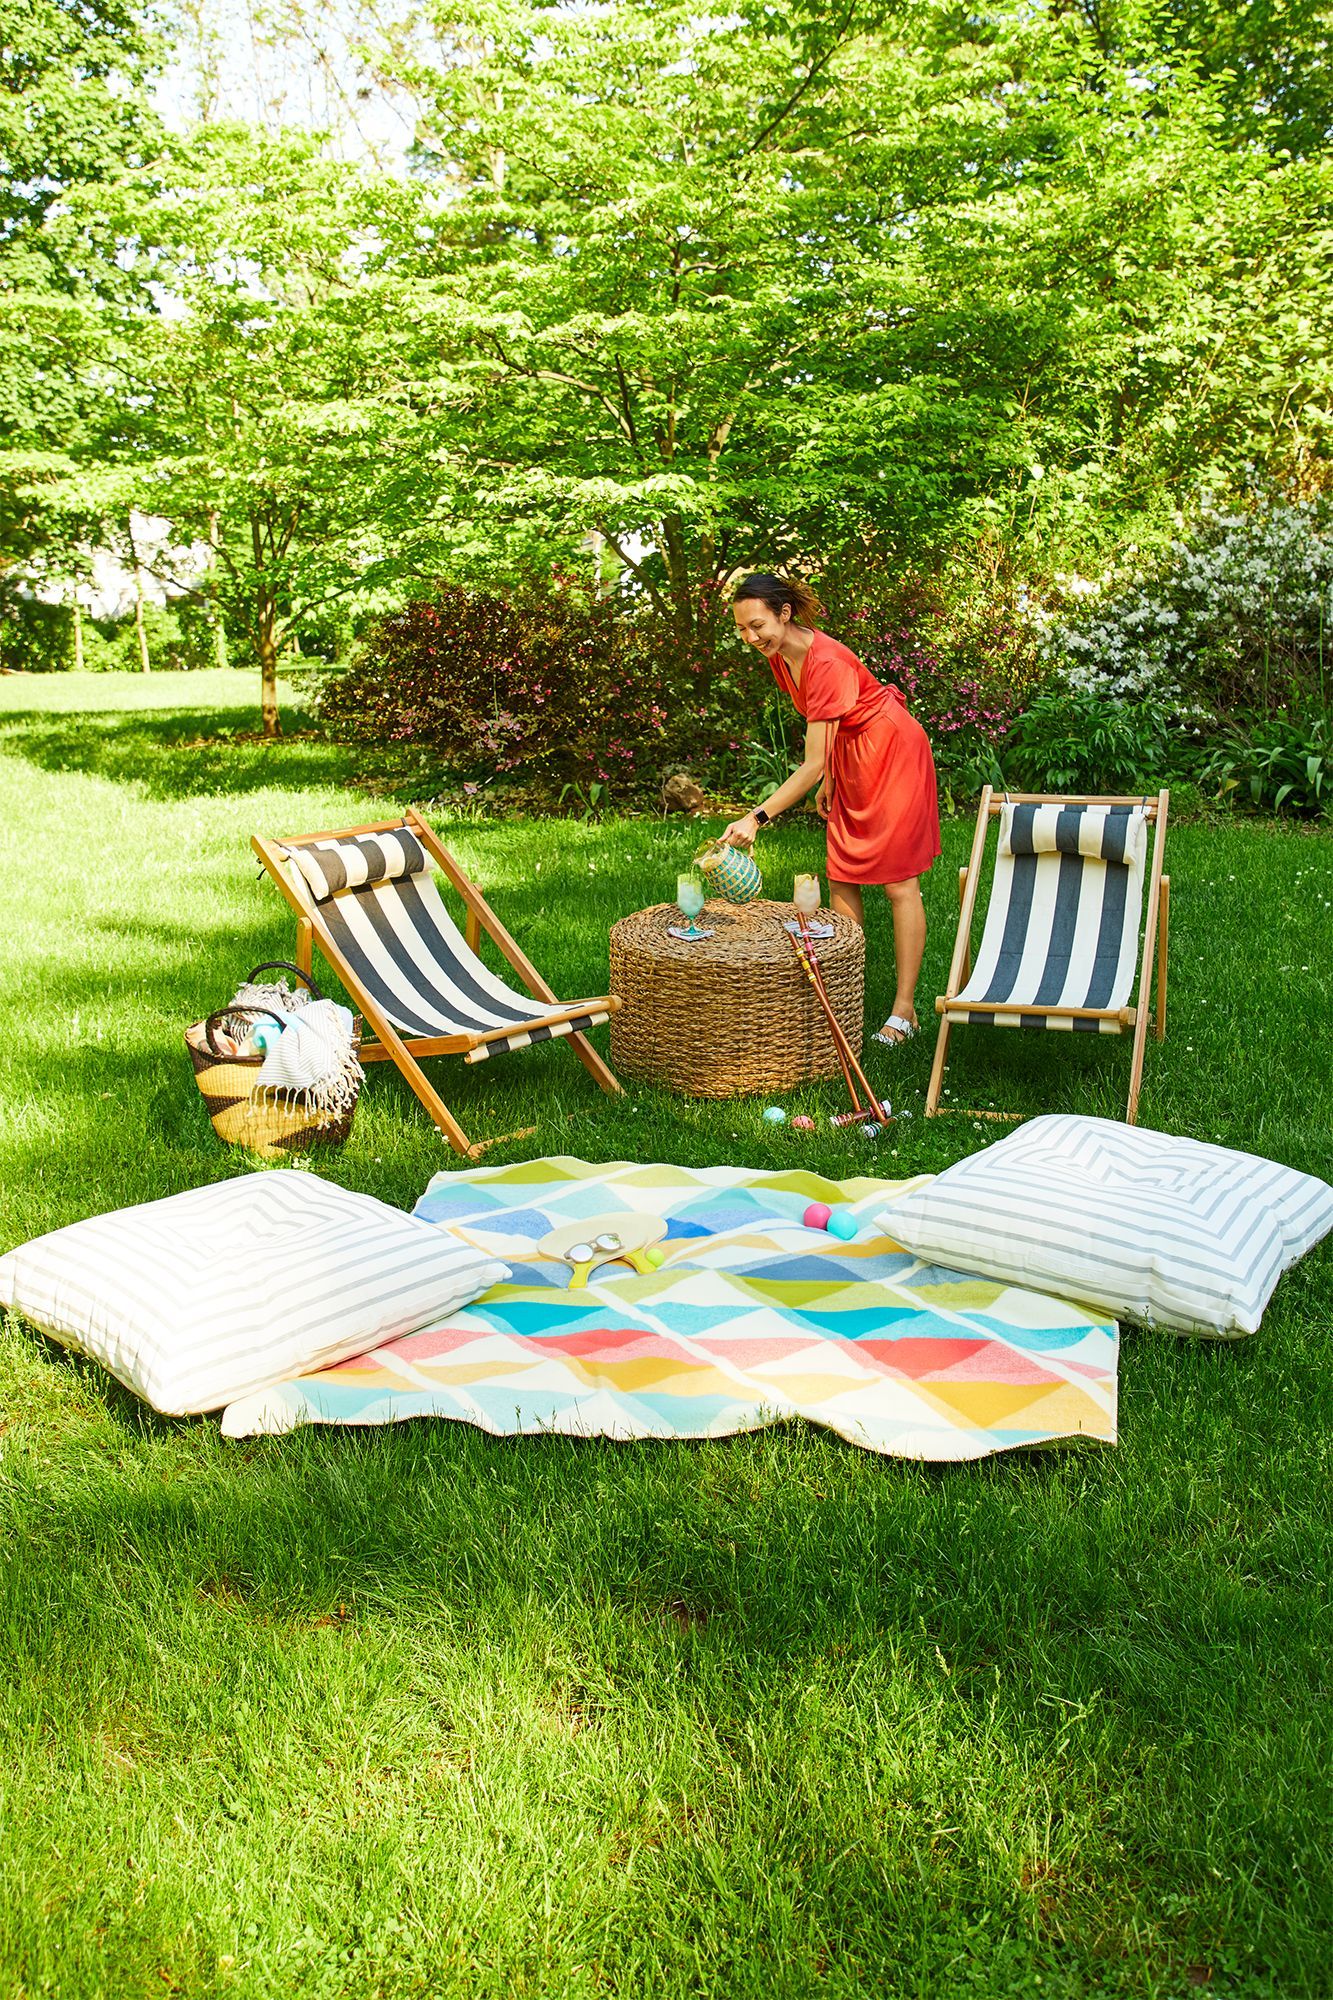 Make your lawn stand apart with amazing
lawn chairs